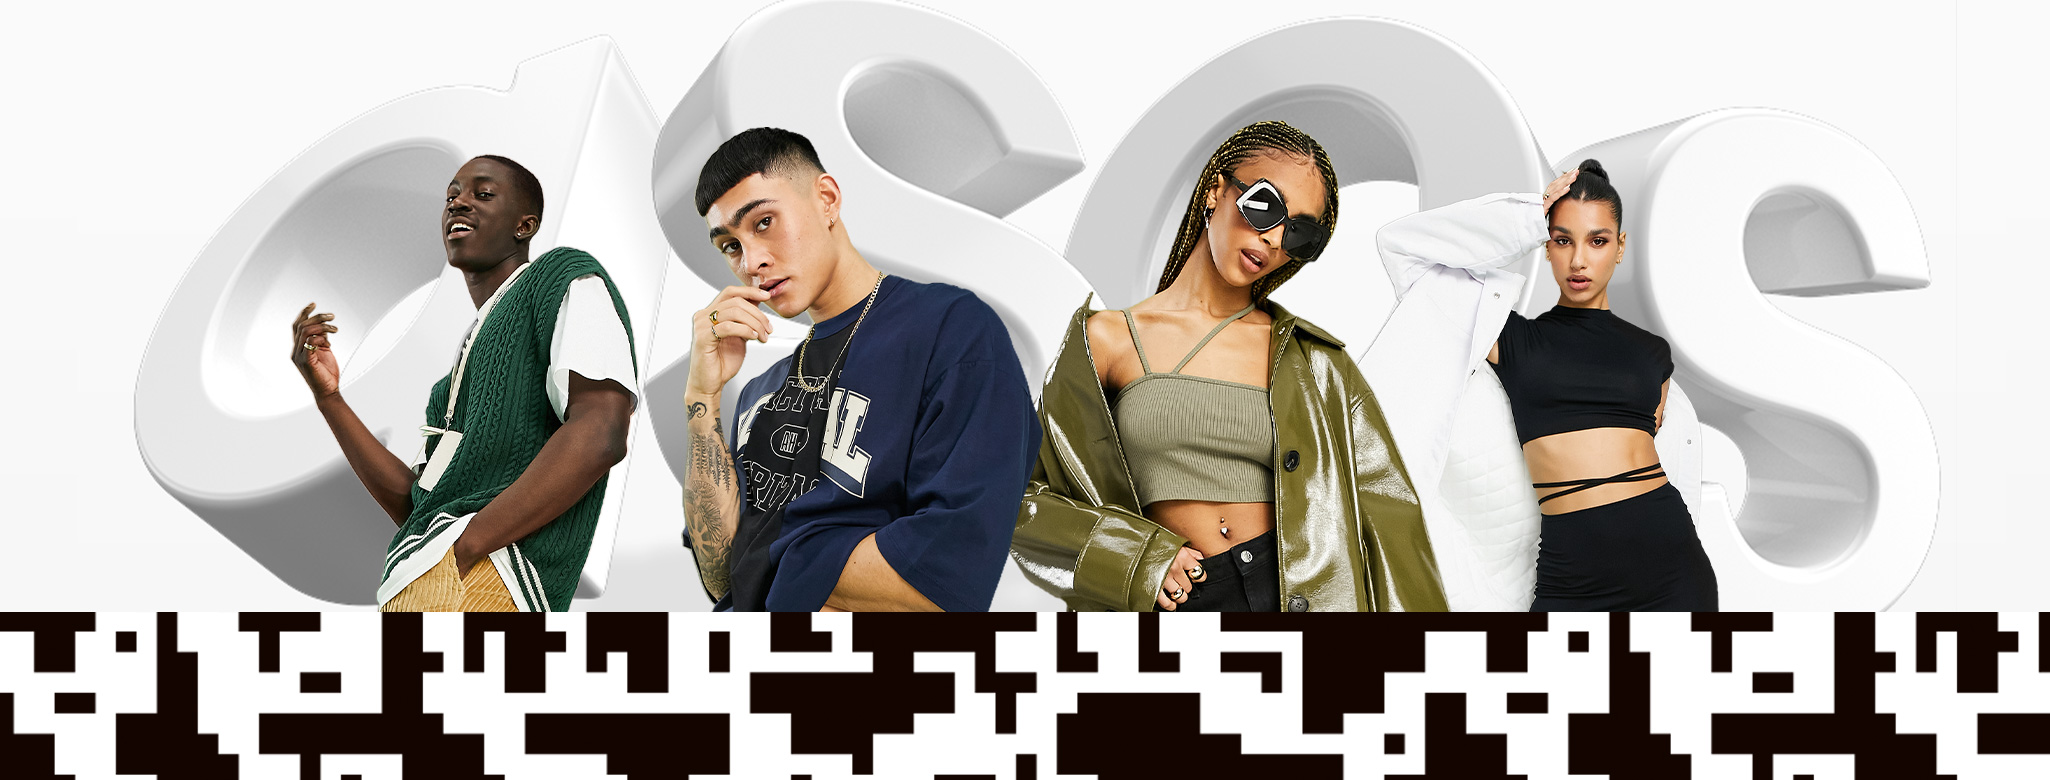 ASOS up to 80% OFF everything + extra 20% OFF with promo code